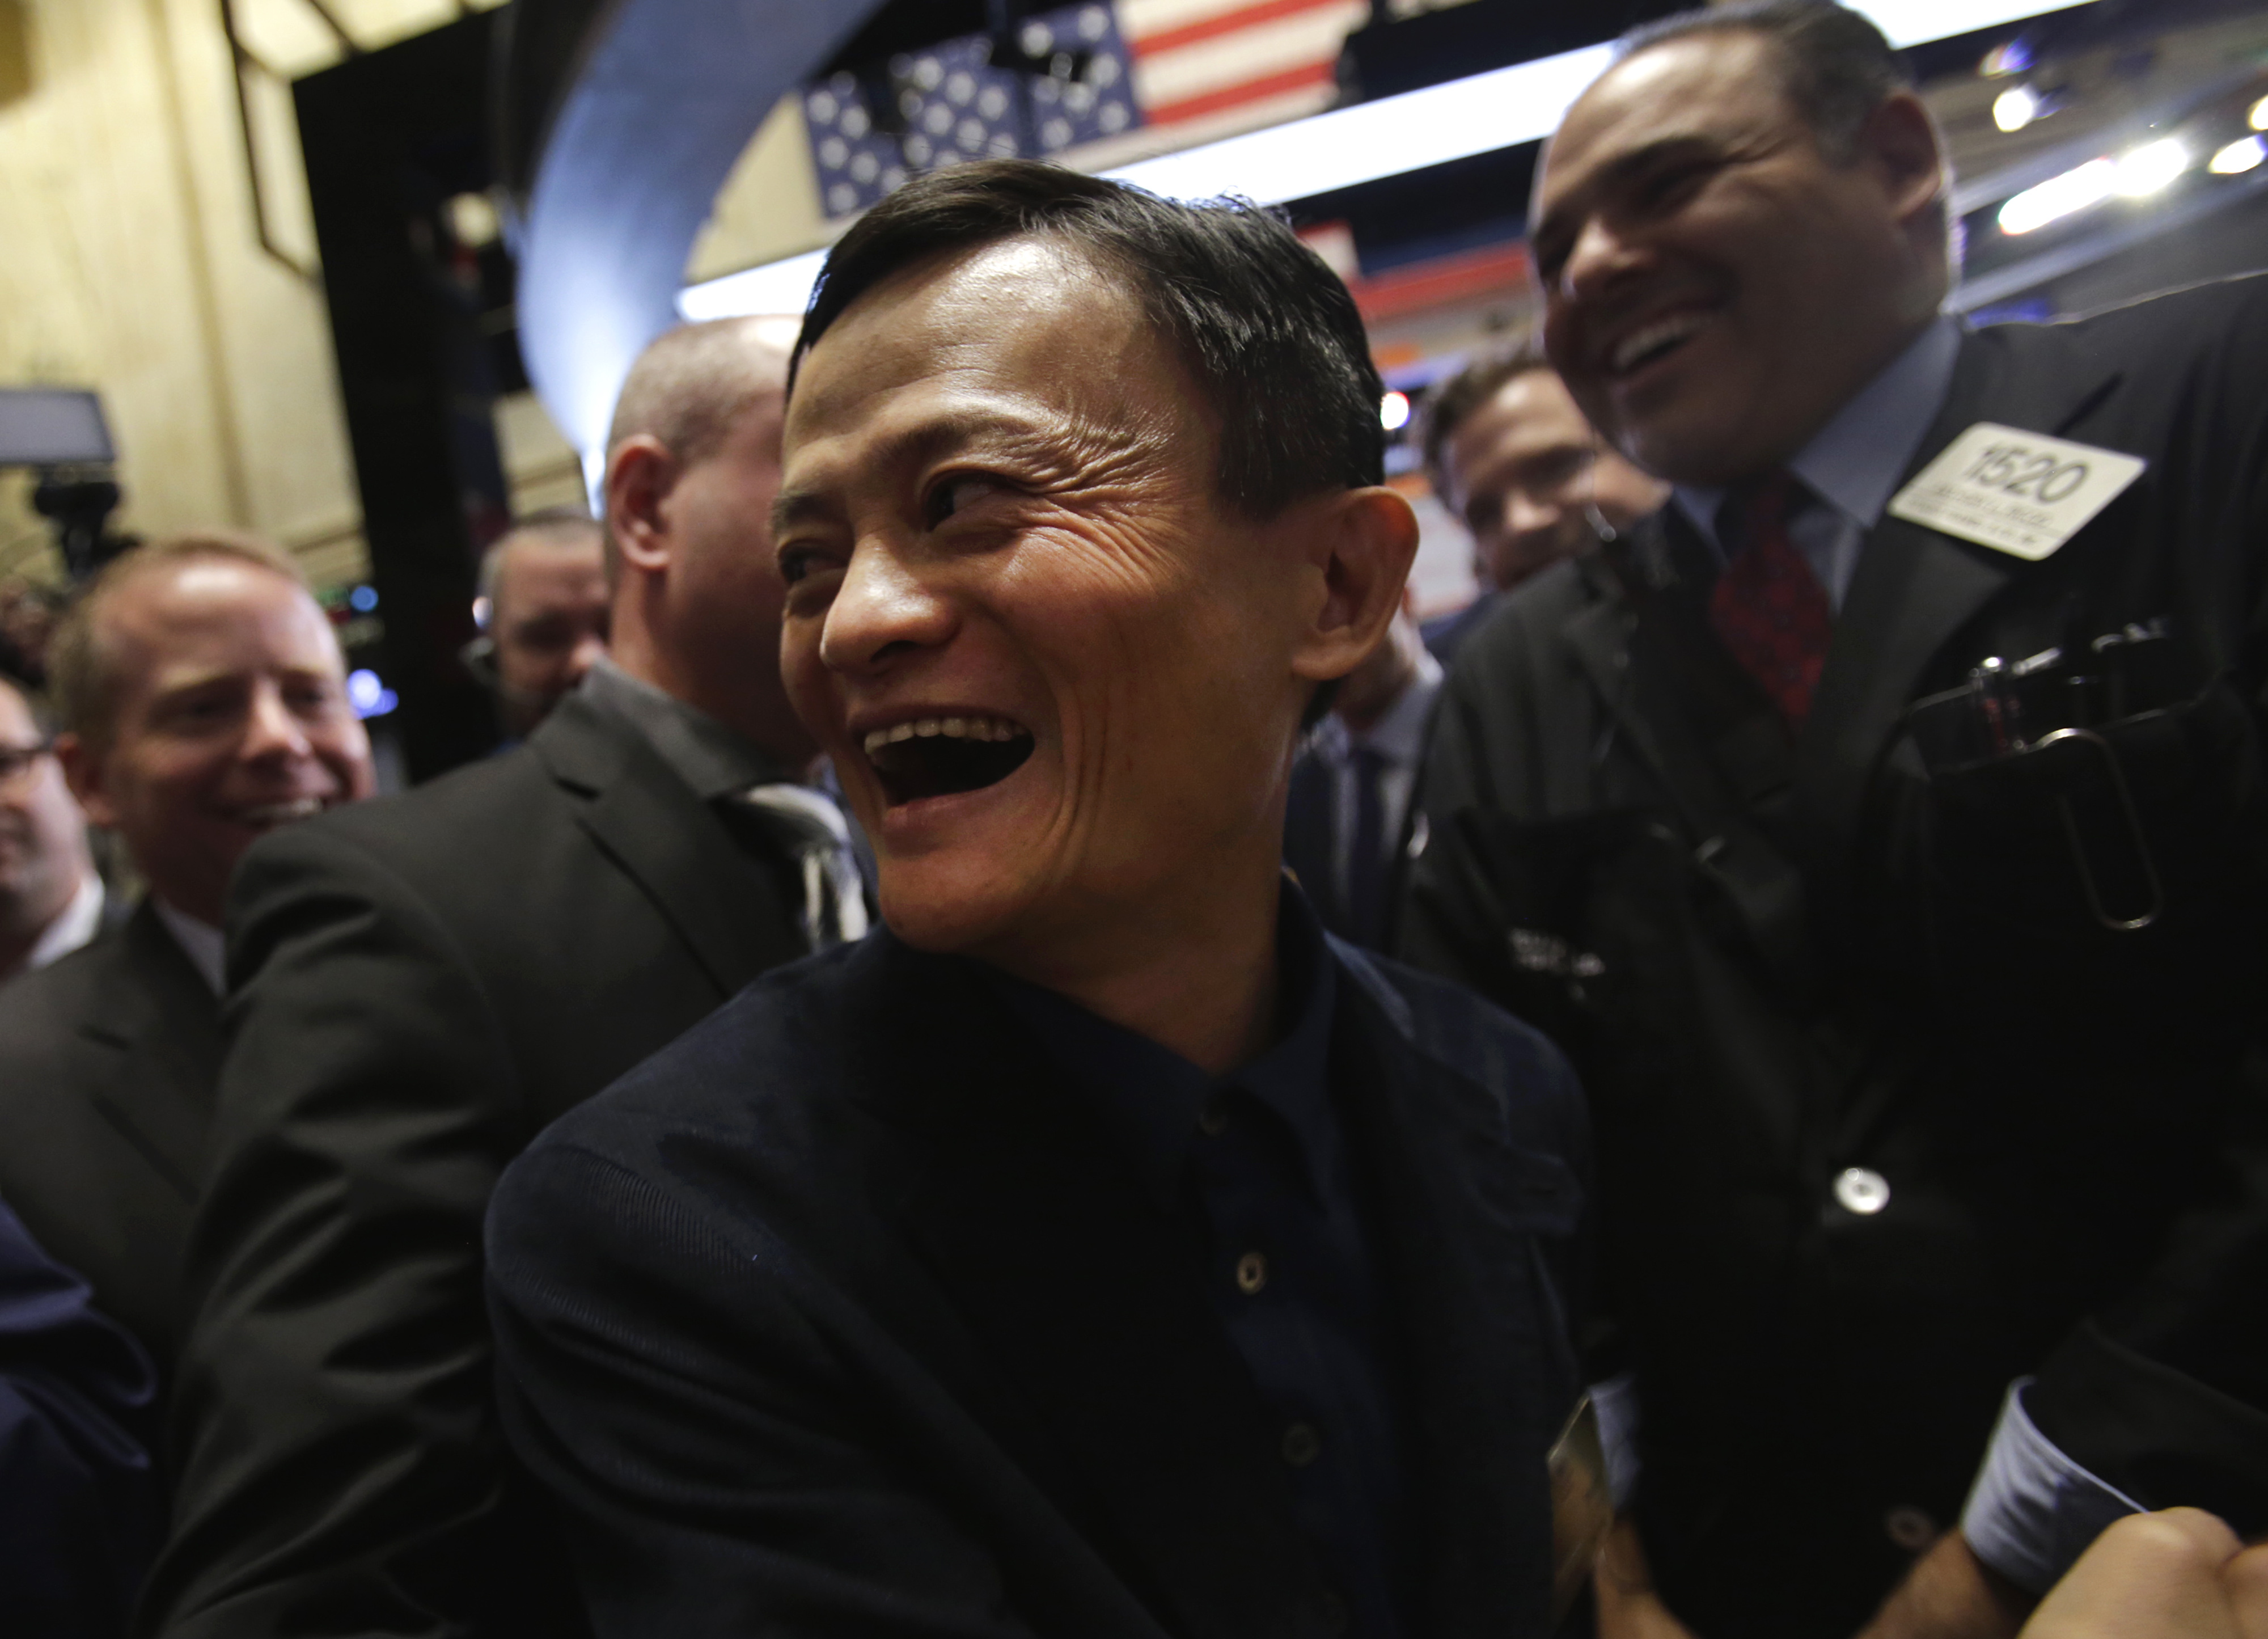 Billionaire Jack Ma, chairman of Alibaba Group Holding Ltd., smiles while touring the floor of the New York Stock Exchange (NYSE) in New York, U.S., on Friday, Sept. 19, 2014. (Bloomberg&mdash;Bloomberg via Getty Images)